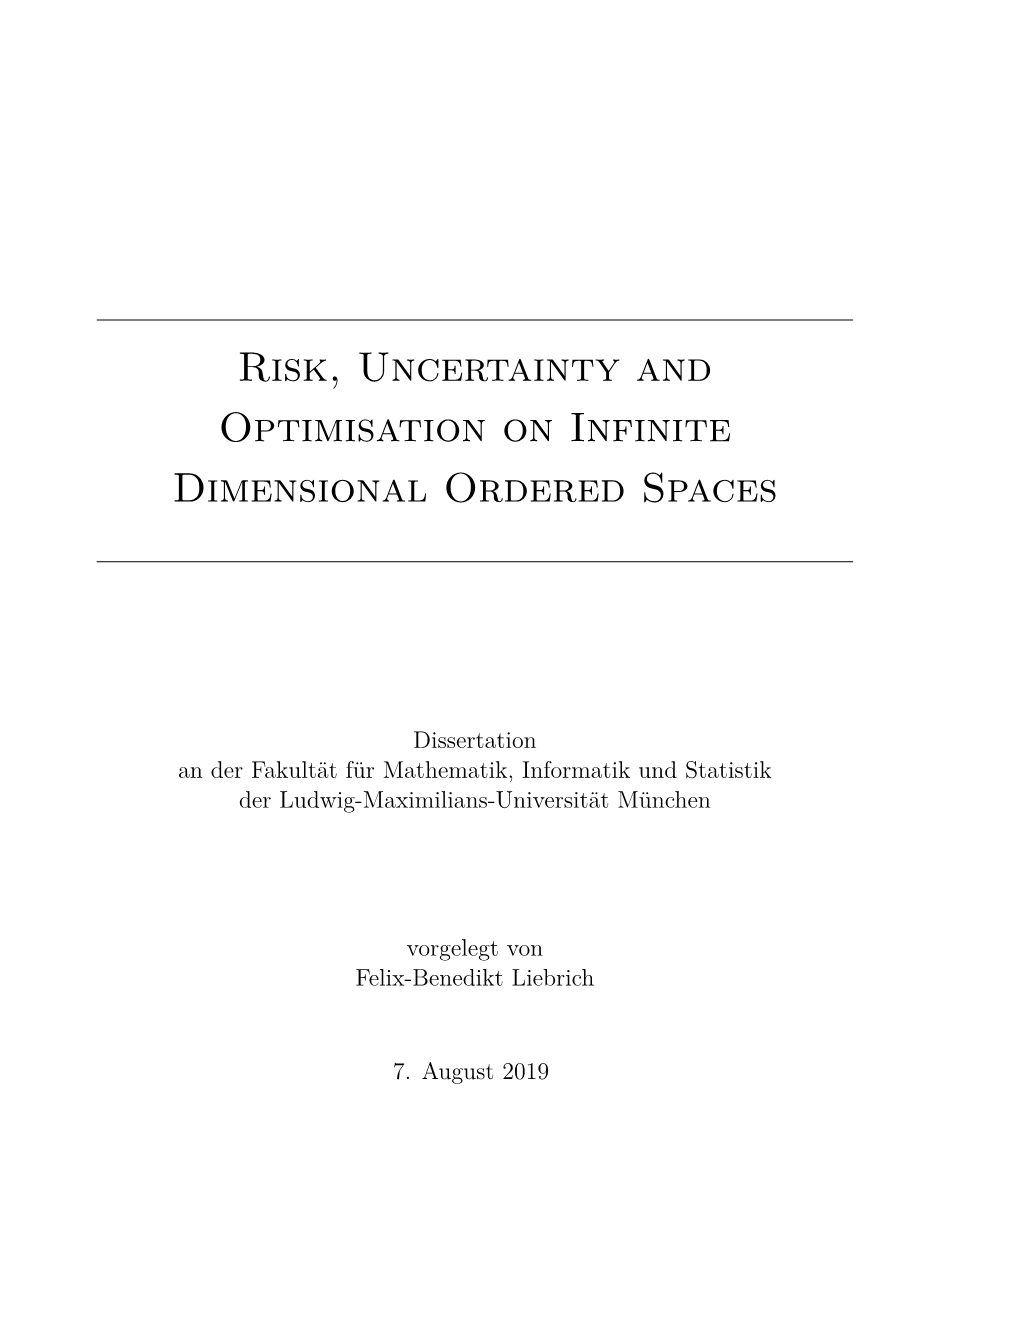 Risk, Uncertainty and Optimisation on Infinite Dimensional Ordered Spaces